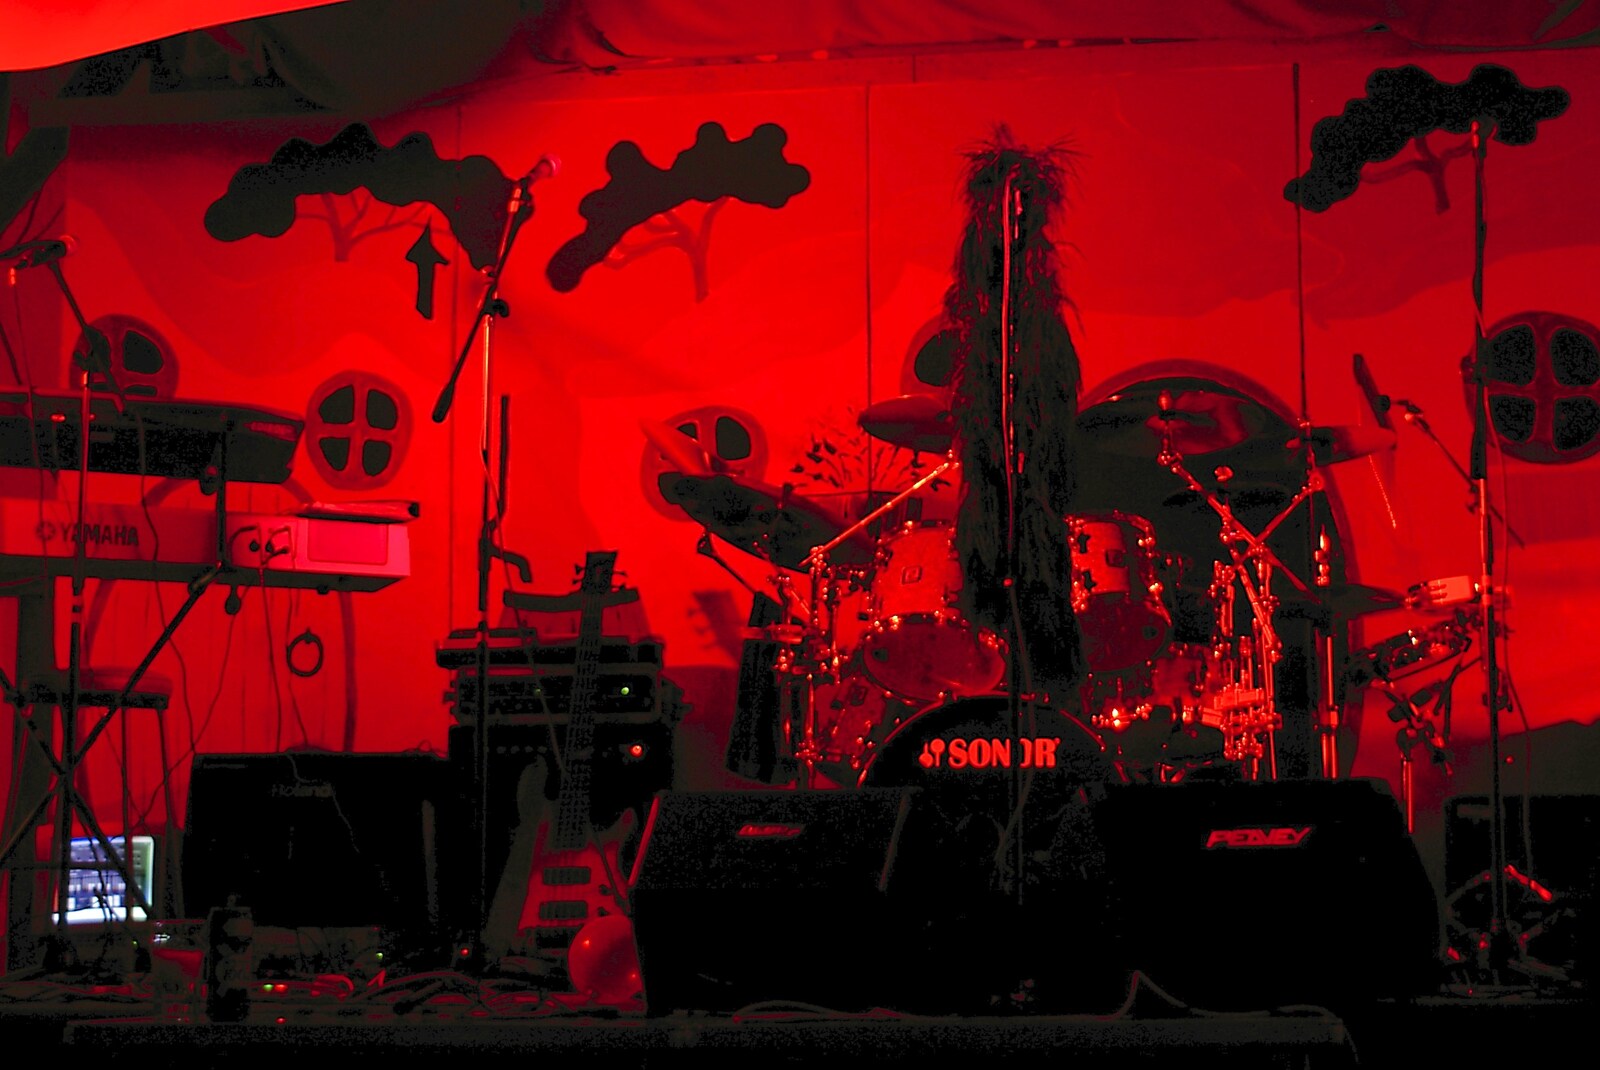 The stage in red light from The BBs do Bressingham and a Night in Elsworth, Norfolk and Cambridge - 17th December 2004